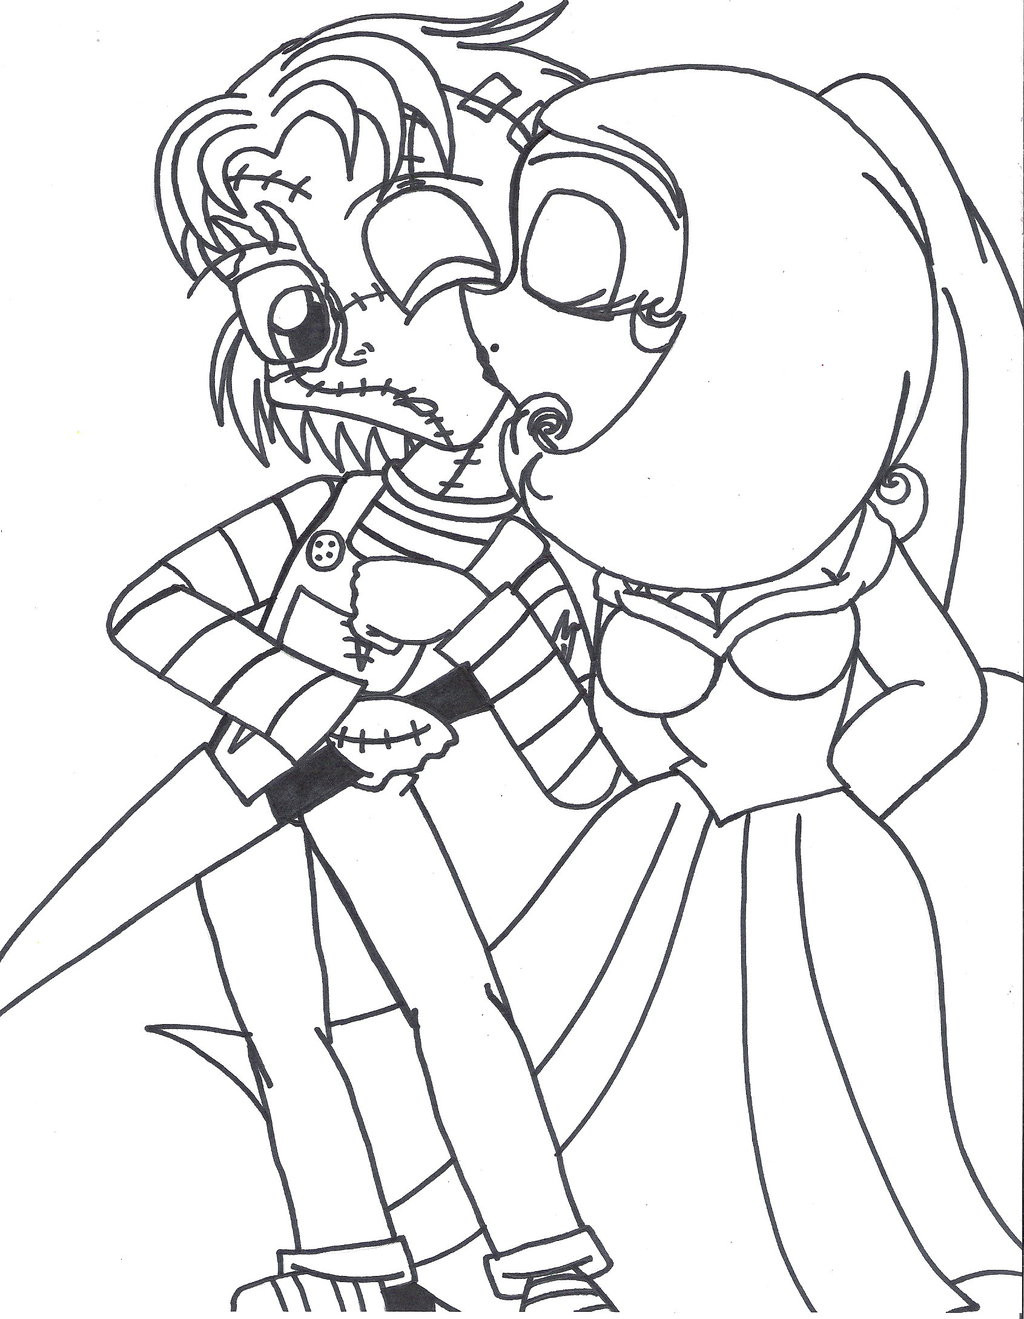 Chucky Coloring Pages
 Chibi Chucky and Tiffany by sonicshadowlover13 on DeviantArt